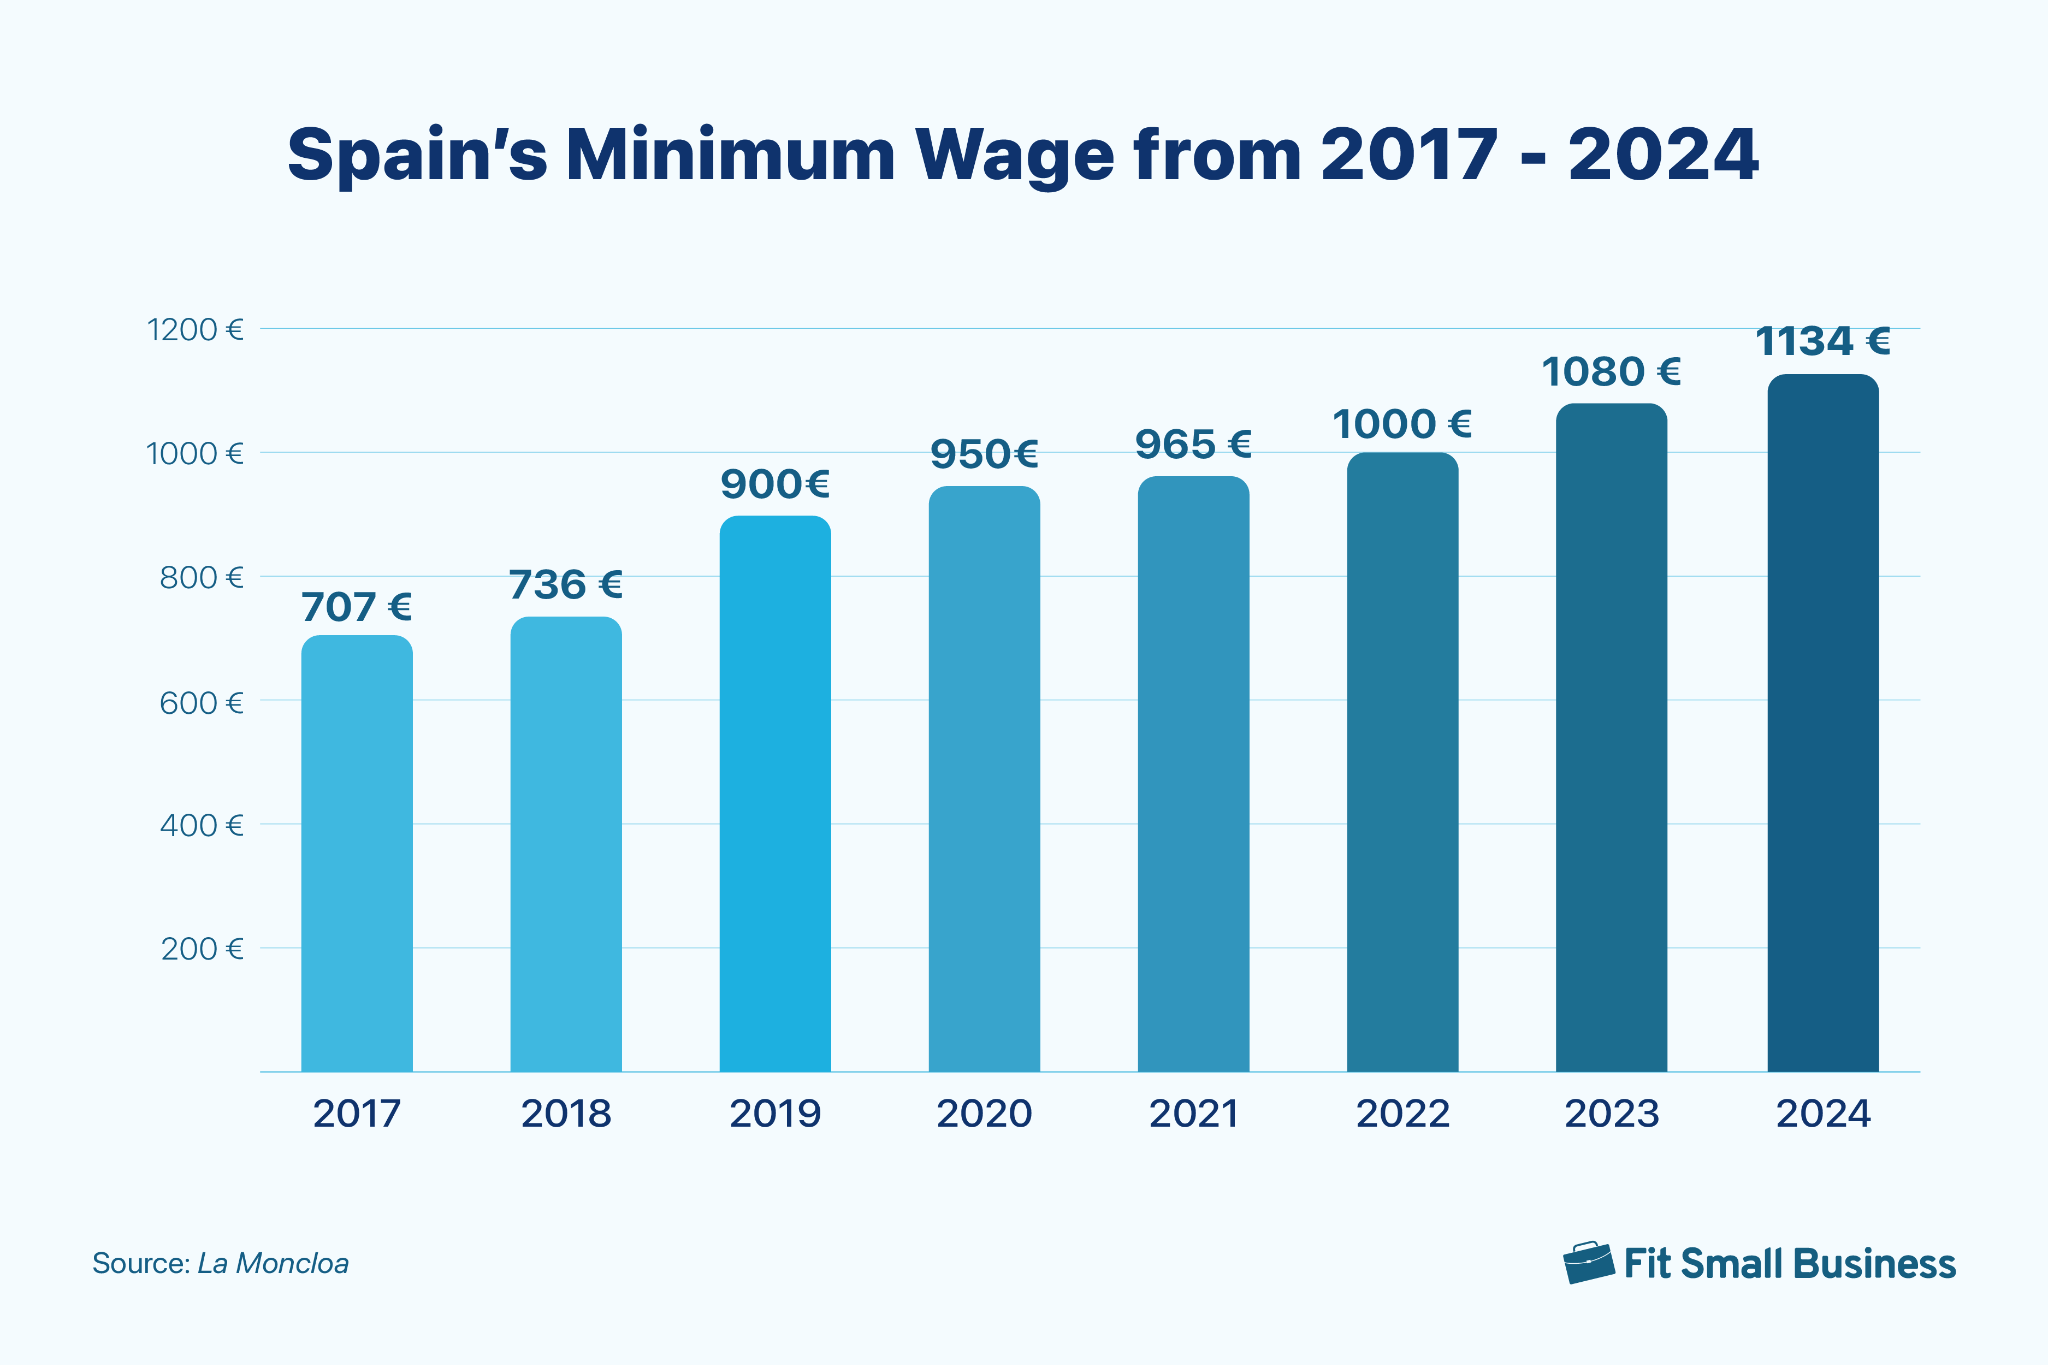 Graph showing Spain's Minimum Wage from 2017 to 2024